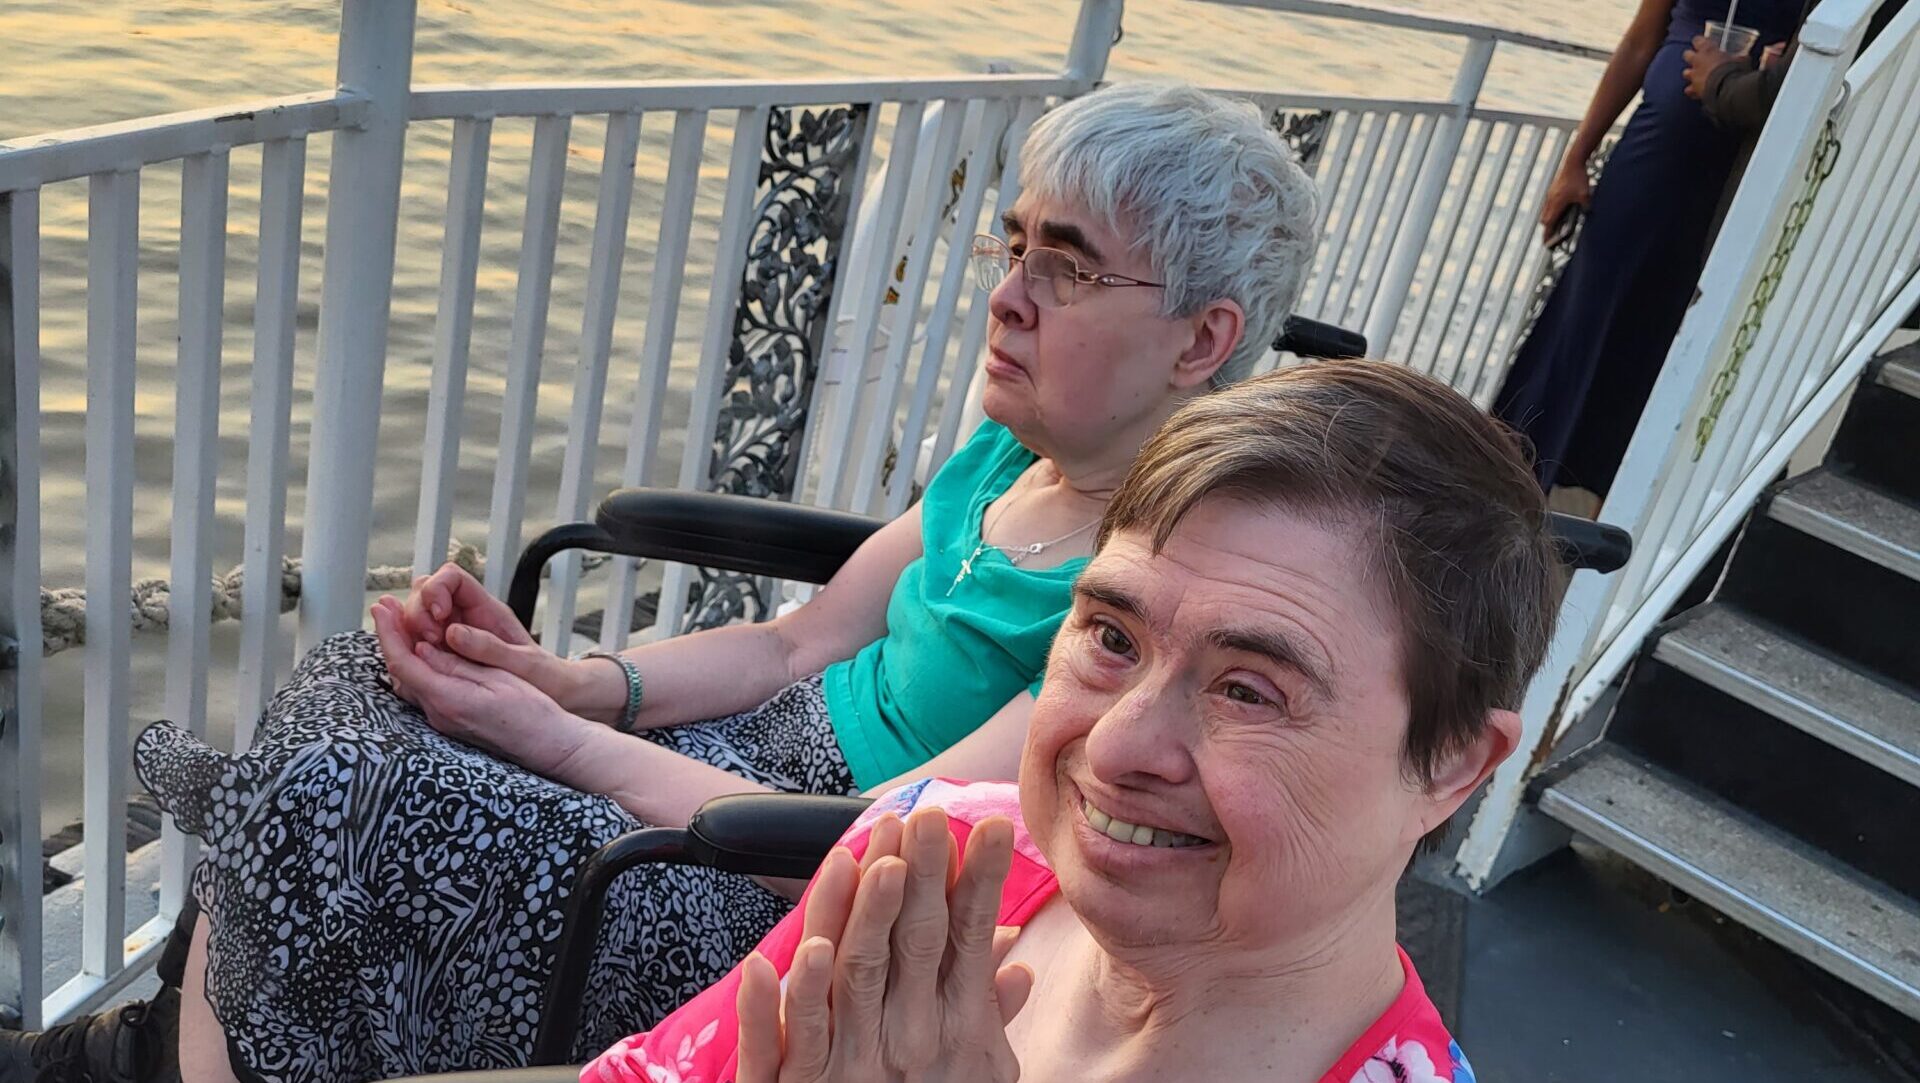 Two women in wheelchairs, one in a floral dress and the other in a turquoise top, enjoy a peaceful river view from a boat deck.